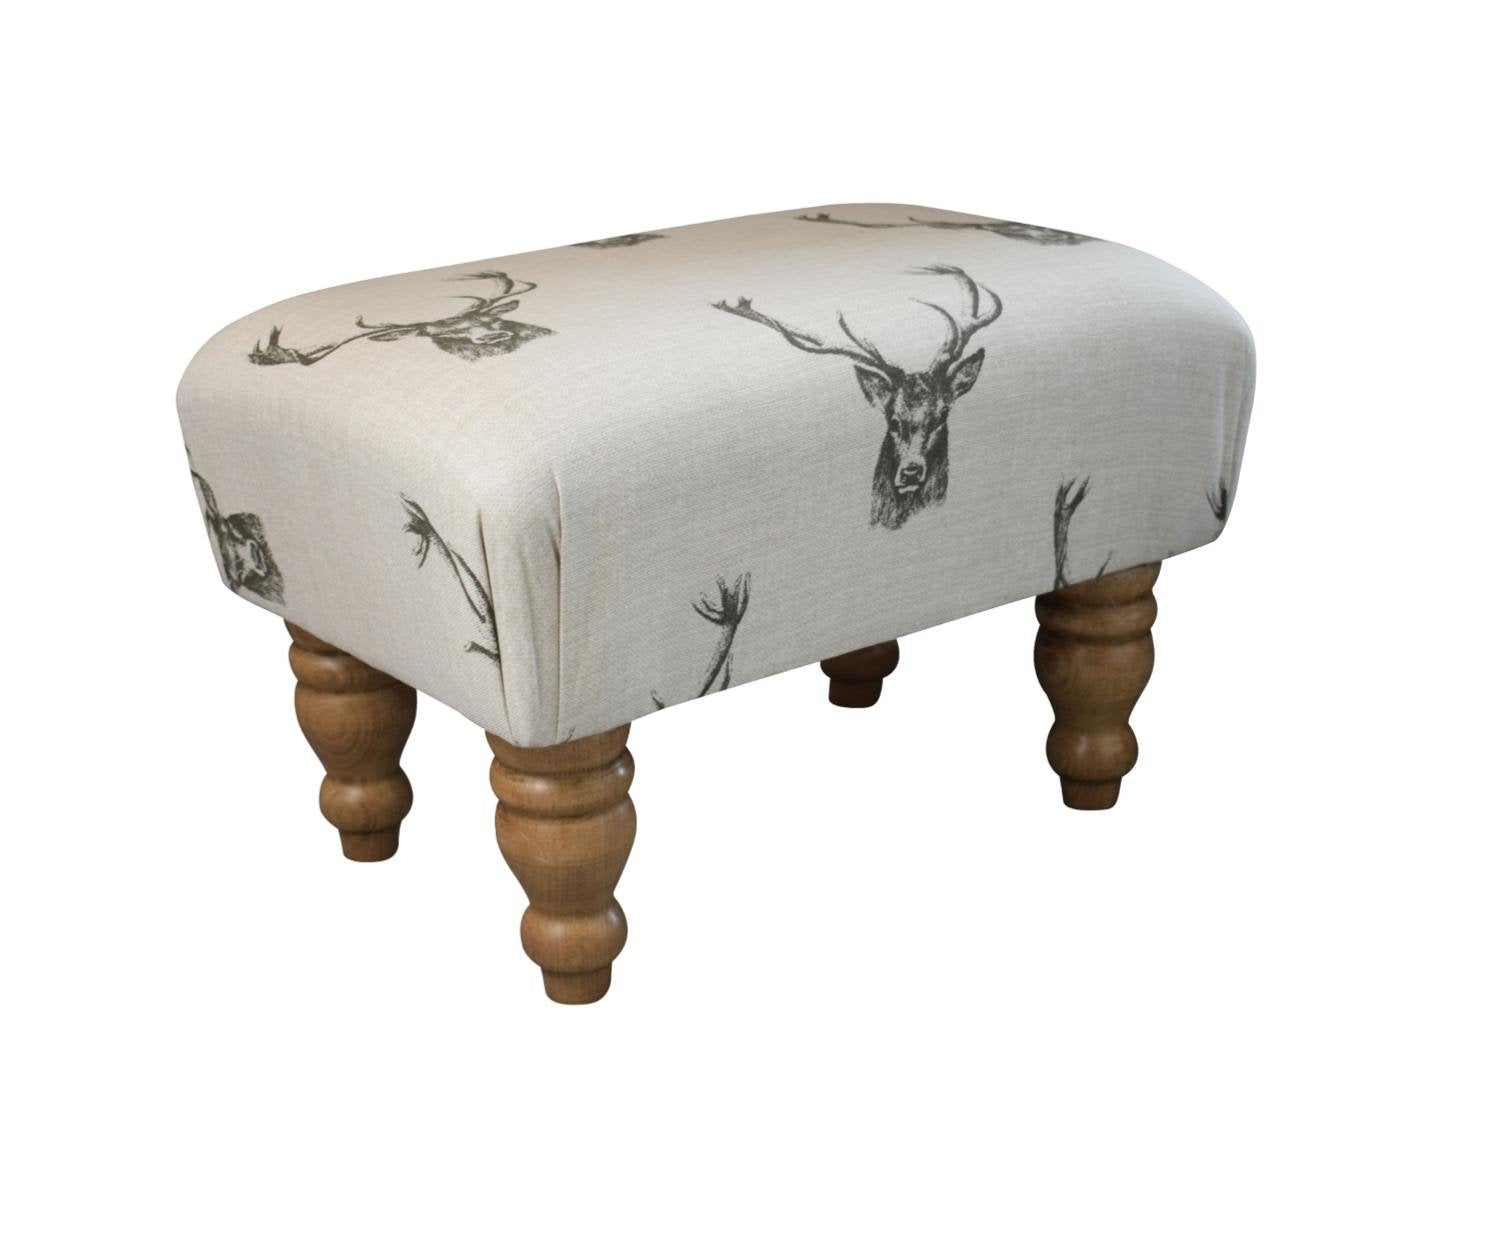 Small Footstool - Stag Head Fabric - Turned Waxed or Mahognay Legs